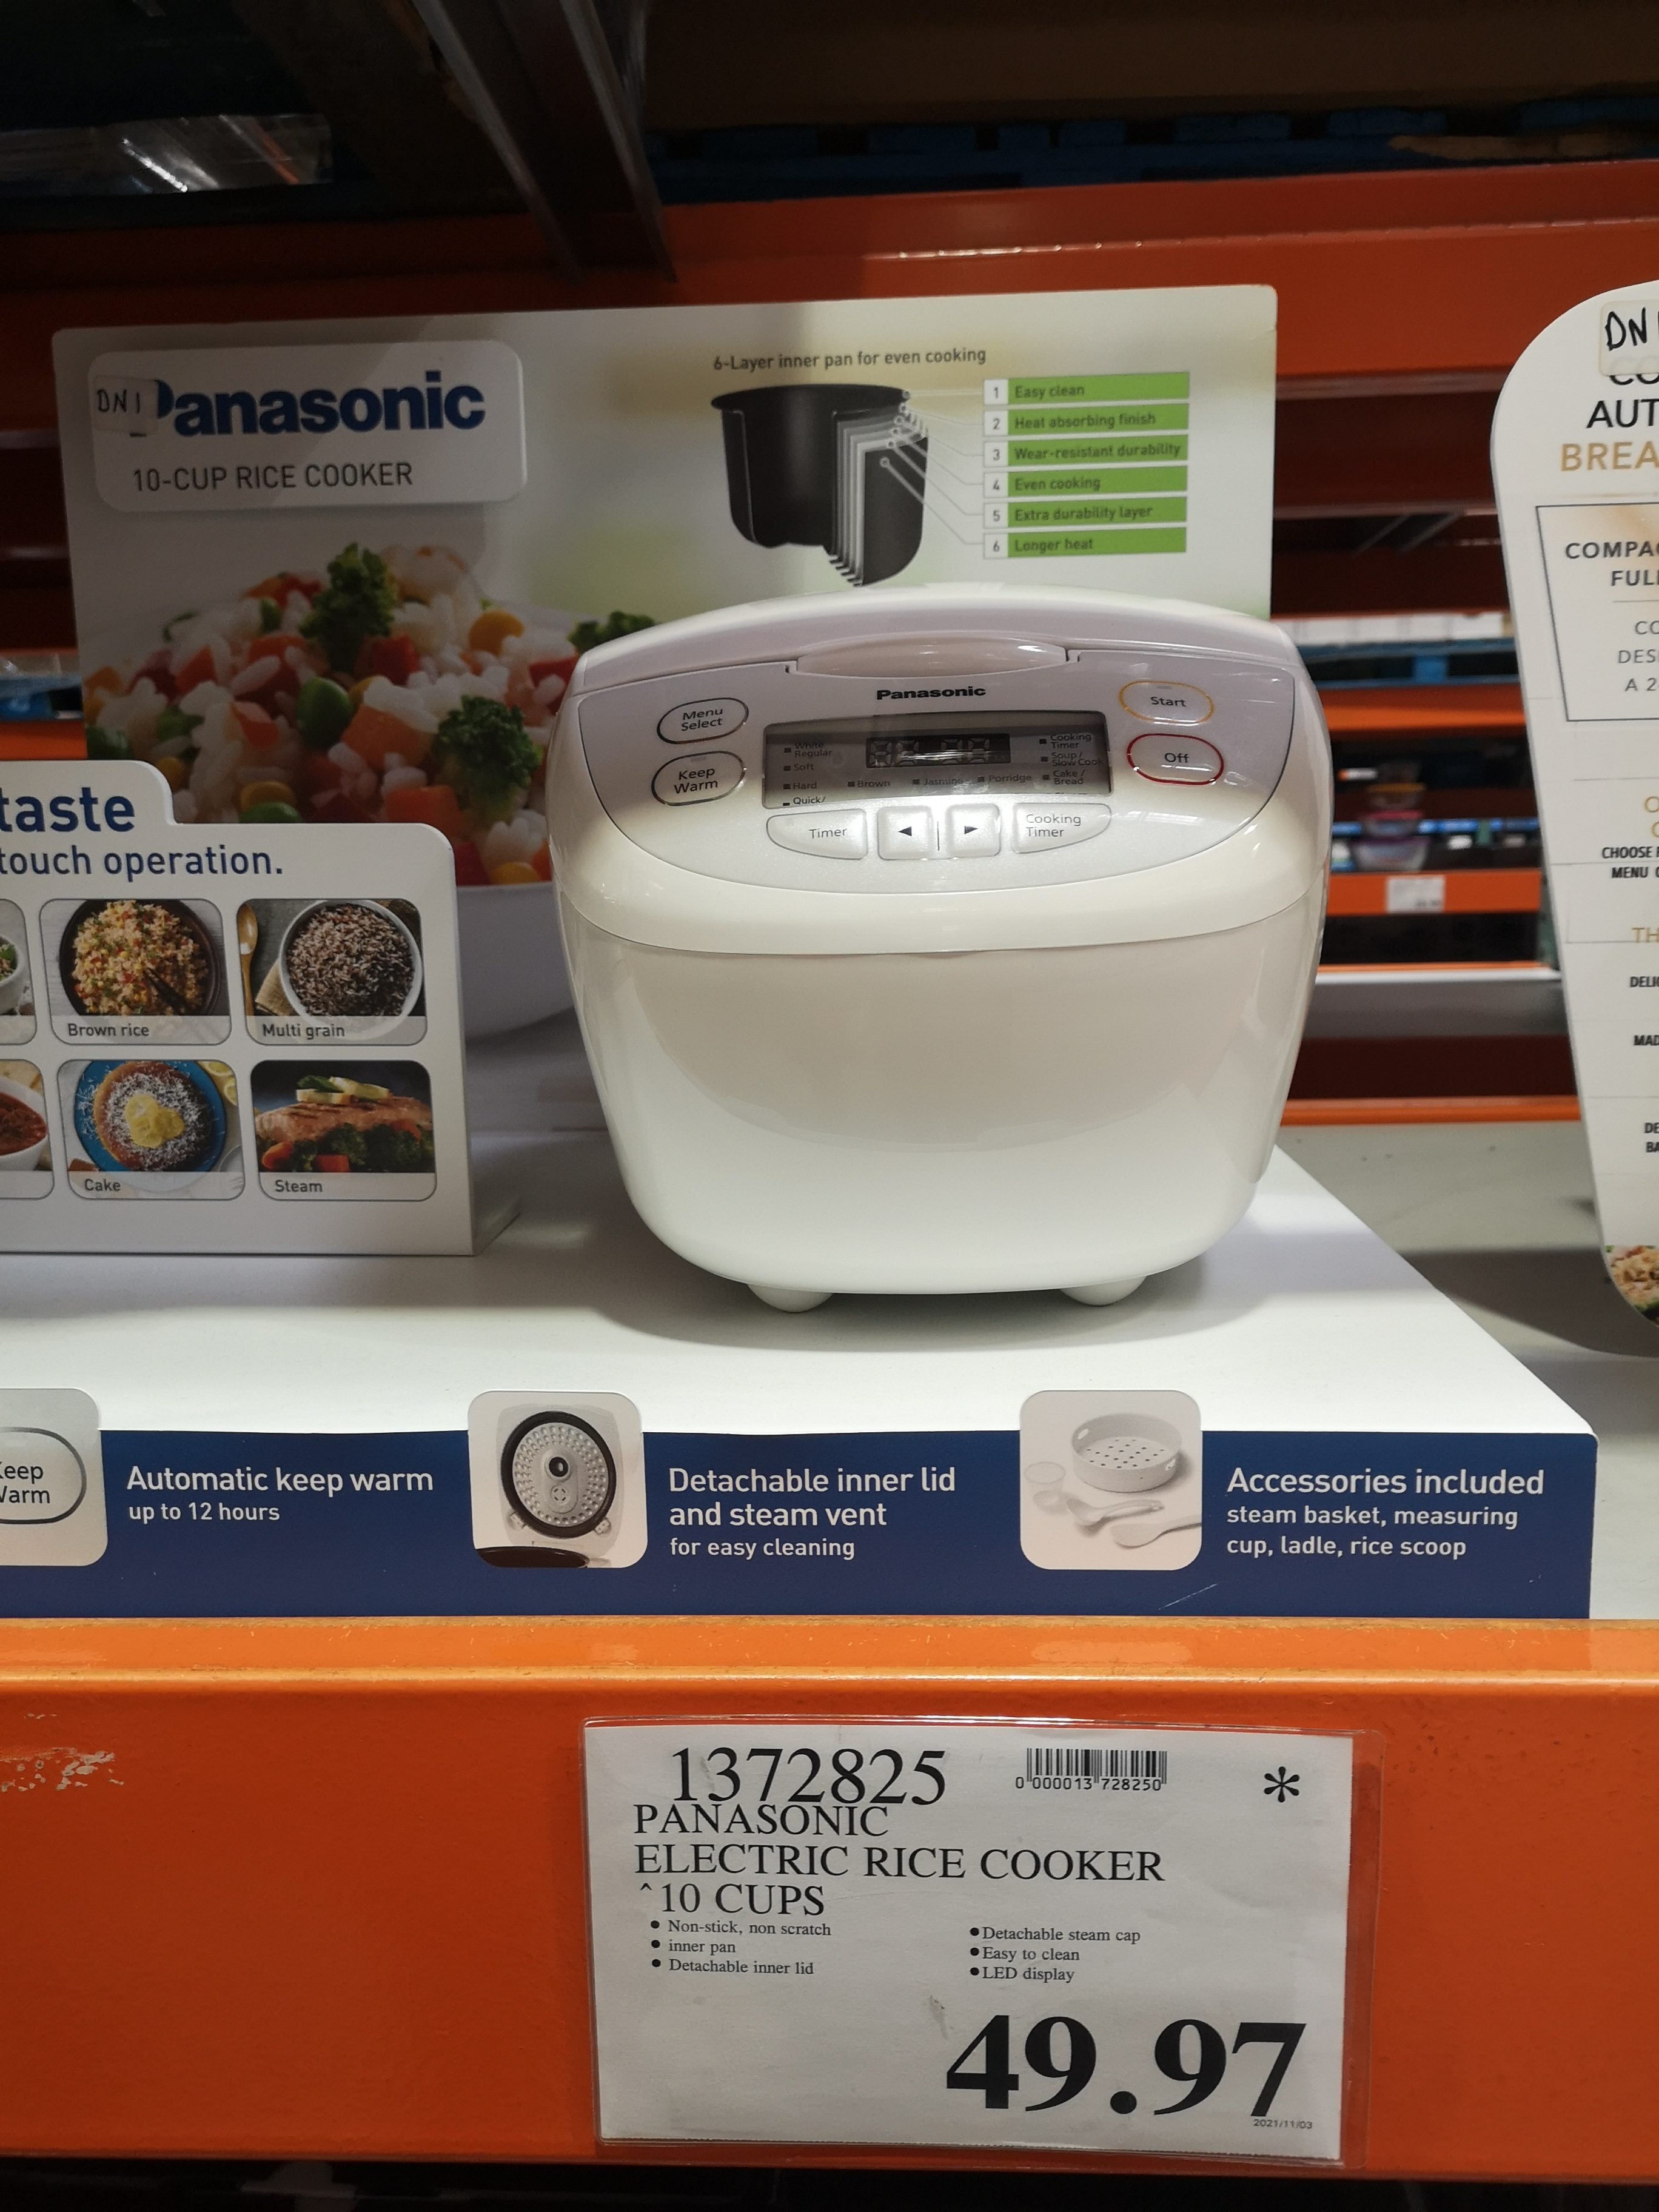 Tiger Rice Cooker on sale for $49.97 : r/Costco